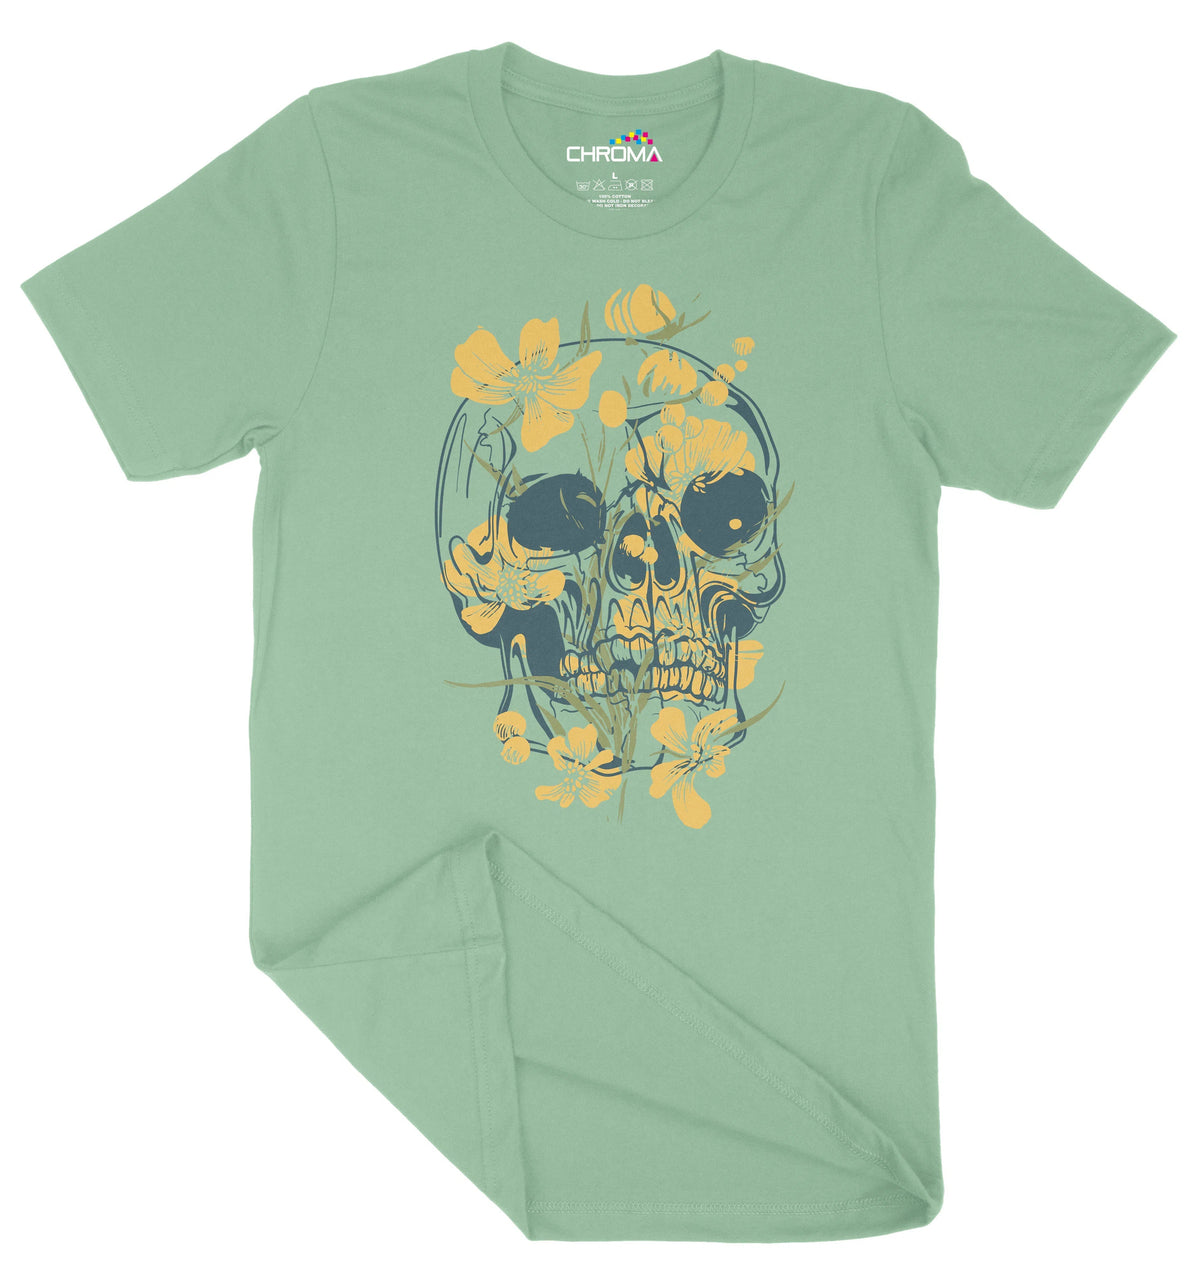 Beauty In Death Unisex Adult T-Shirt | Premium Quality Streetwear Chroma Clothing